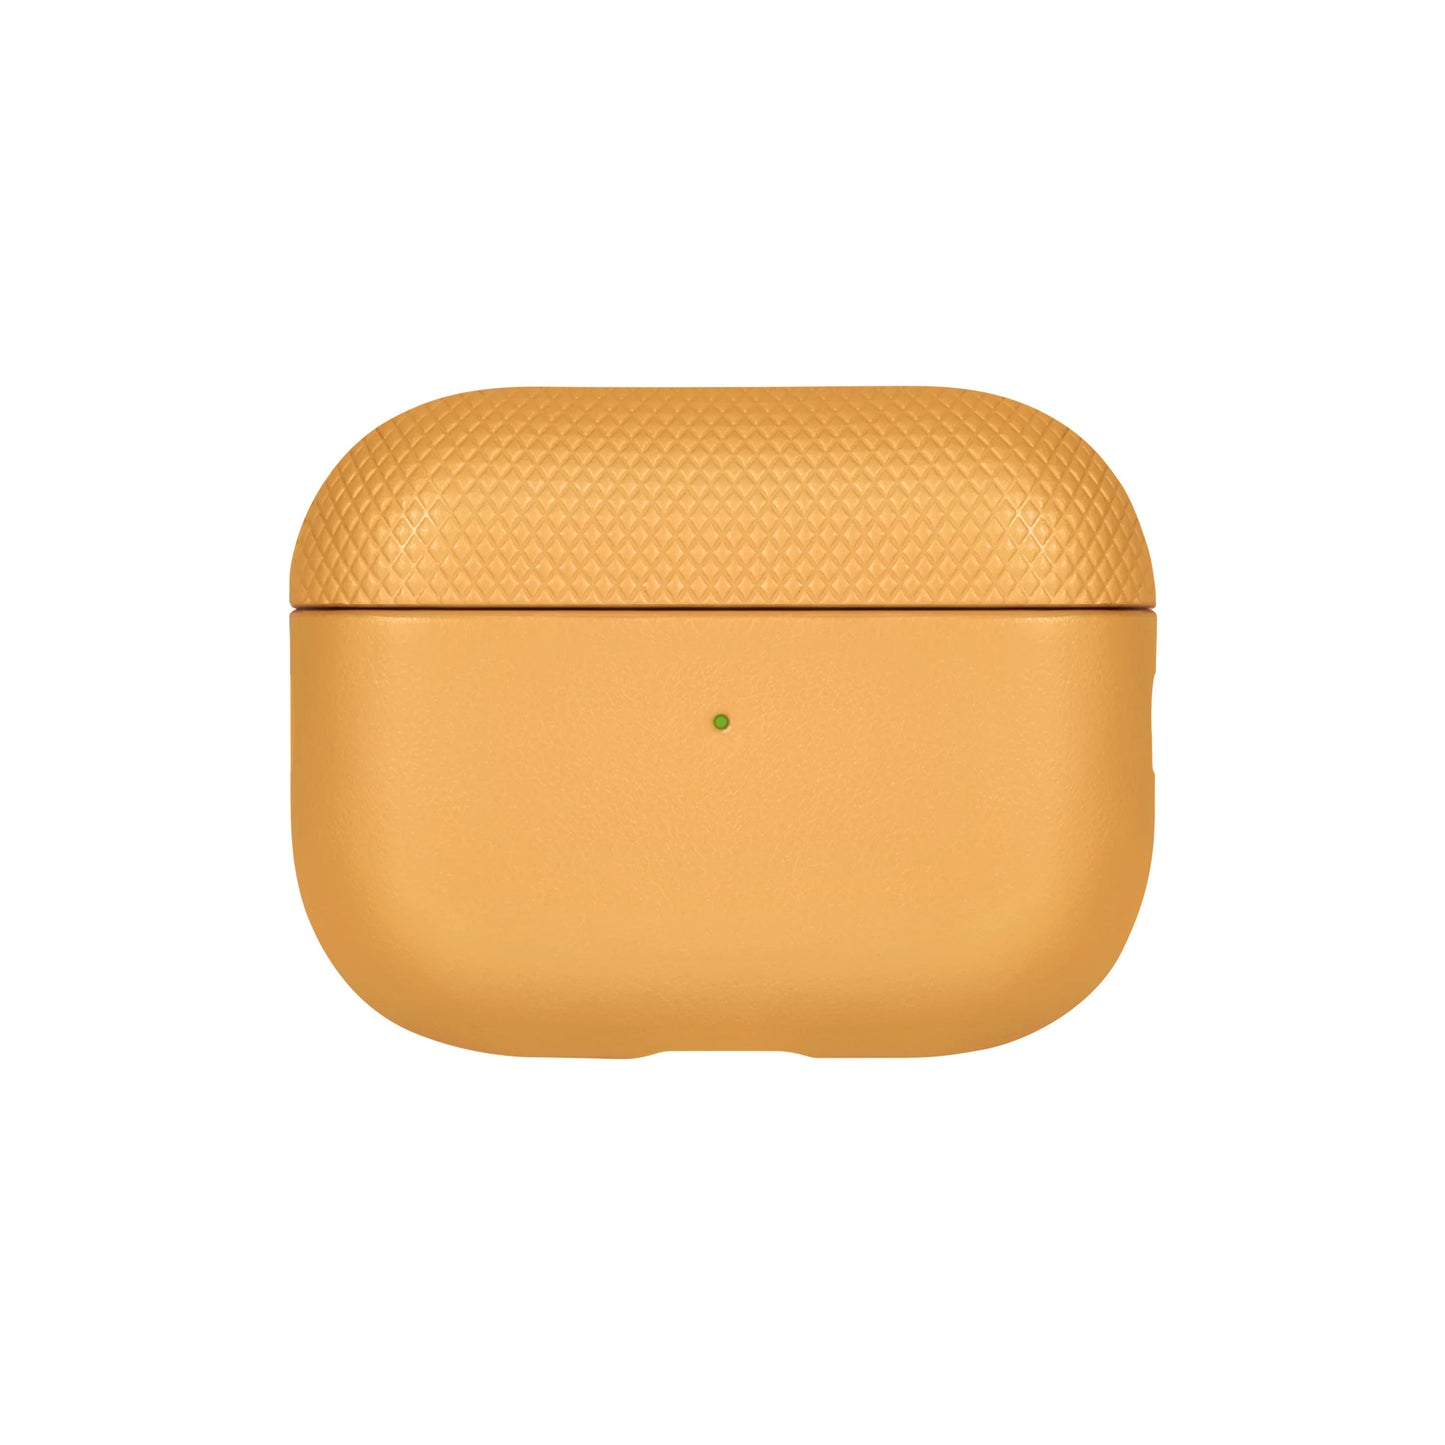 Native Union (Re)Classic Case for AirPods Pro (2nd Gen)